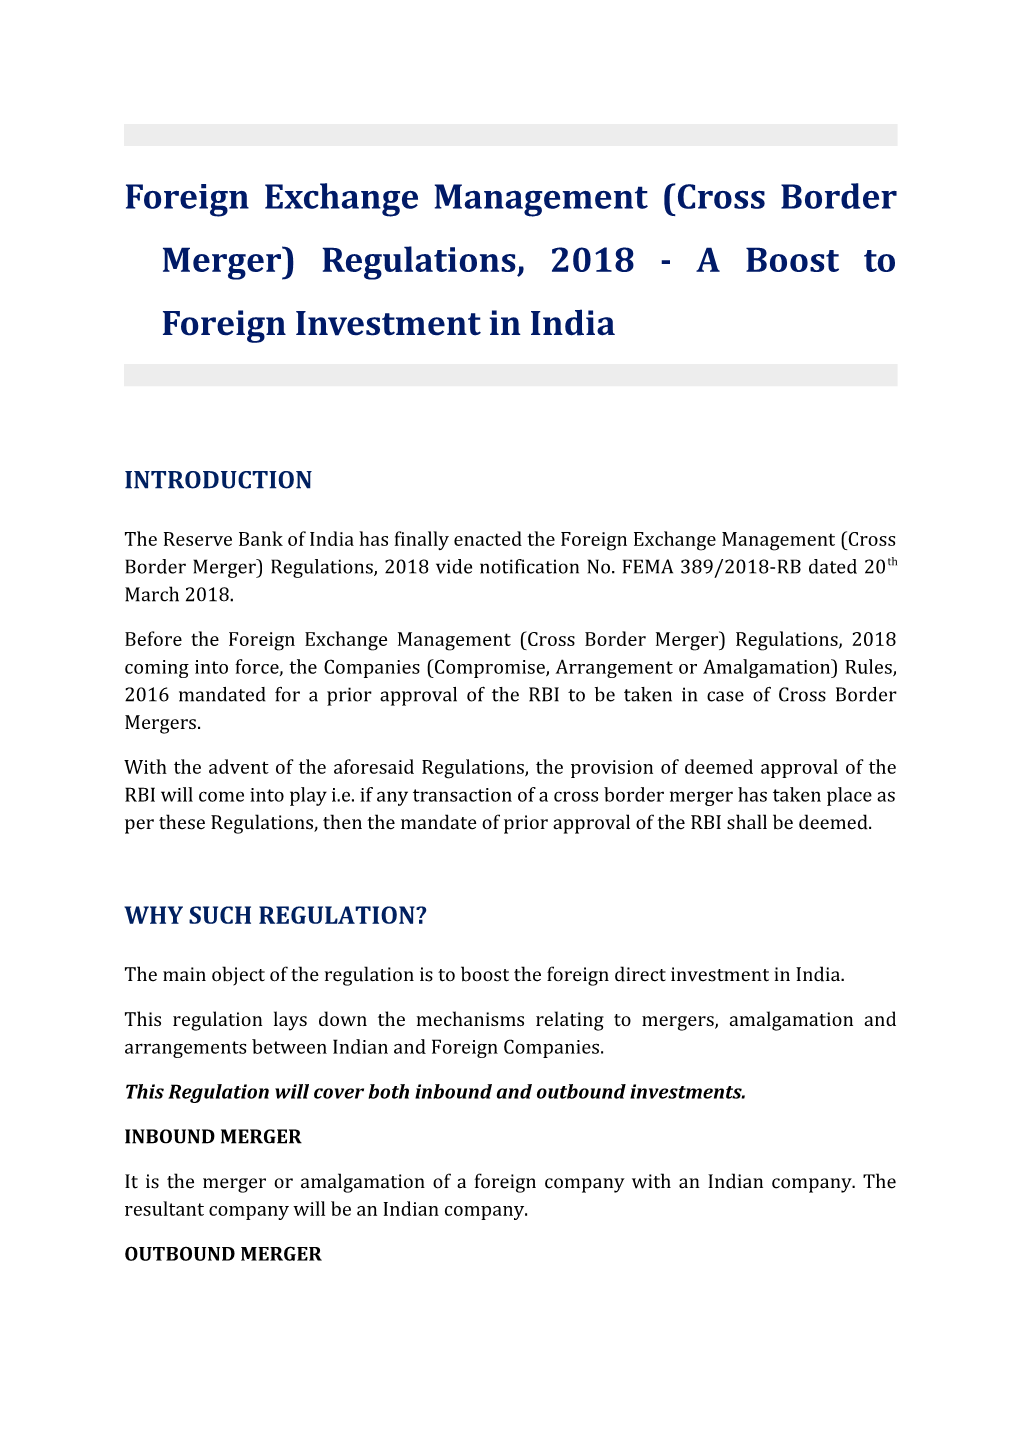 Foreign Exchange Management (Cross Border Merger) Regulations, 2018- a Boost to Foreign